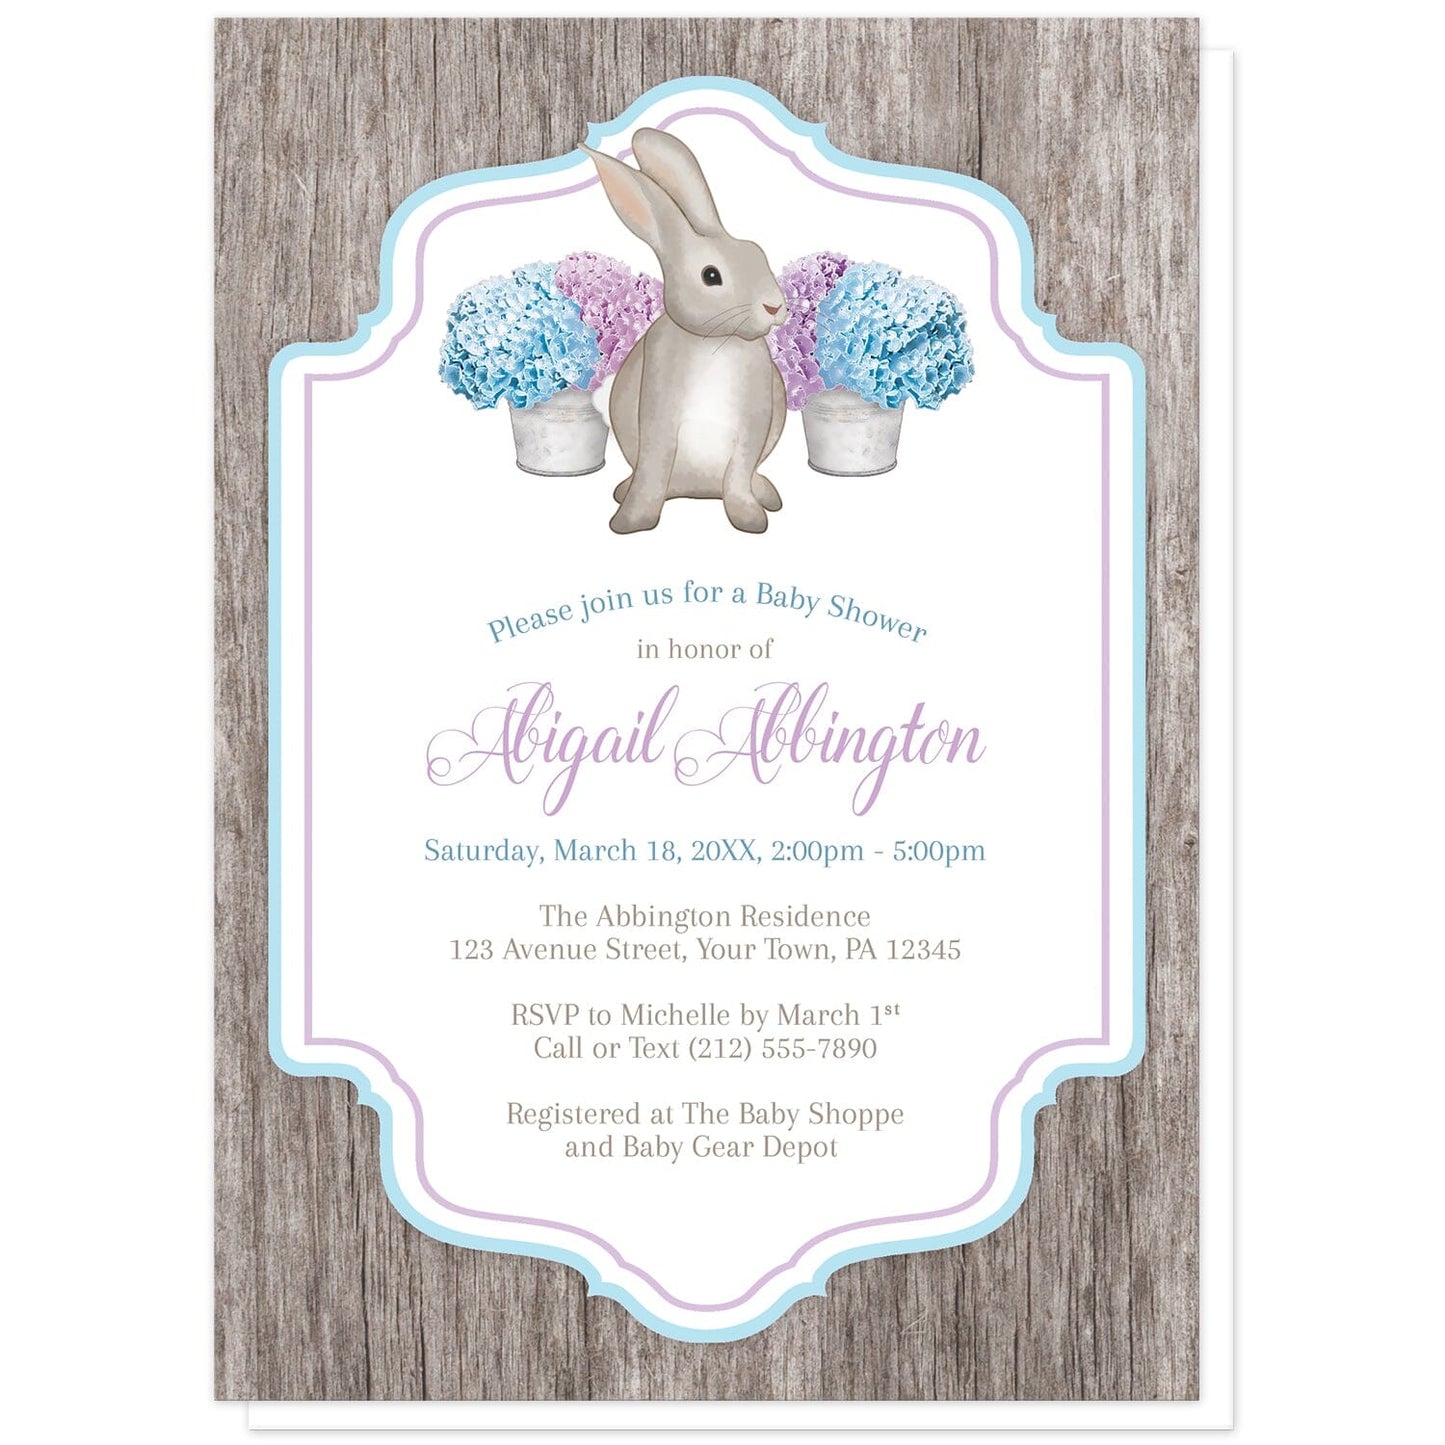 Rustic Purple Blue Hydrangea Rabbit Baby Shower Invitations at Artistically Invited. Rustic purple blue hydrangea rabbit baby shower invitations with a watercolor-inspired illustration of cute little brown bunny rabbit with purple and blue hydrangea floral arrangements in tin buckets. Your personalized baby shower celebration details will be custom printed in purple, blue, and brown in the white frame area, outlined with purple and blue, over a rustic brown wood background.